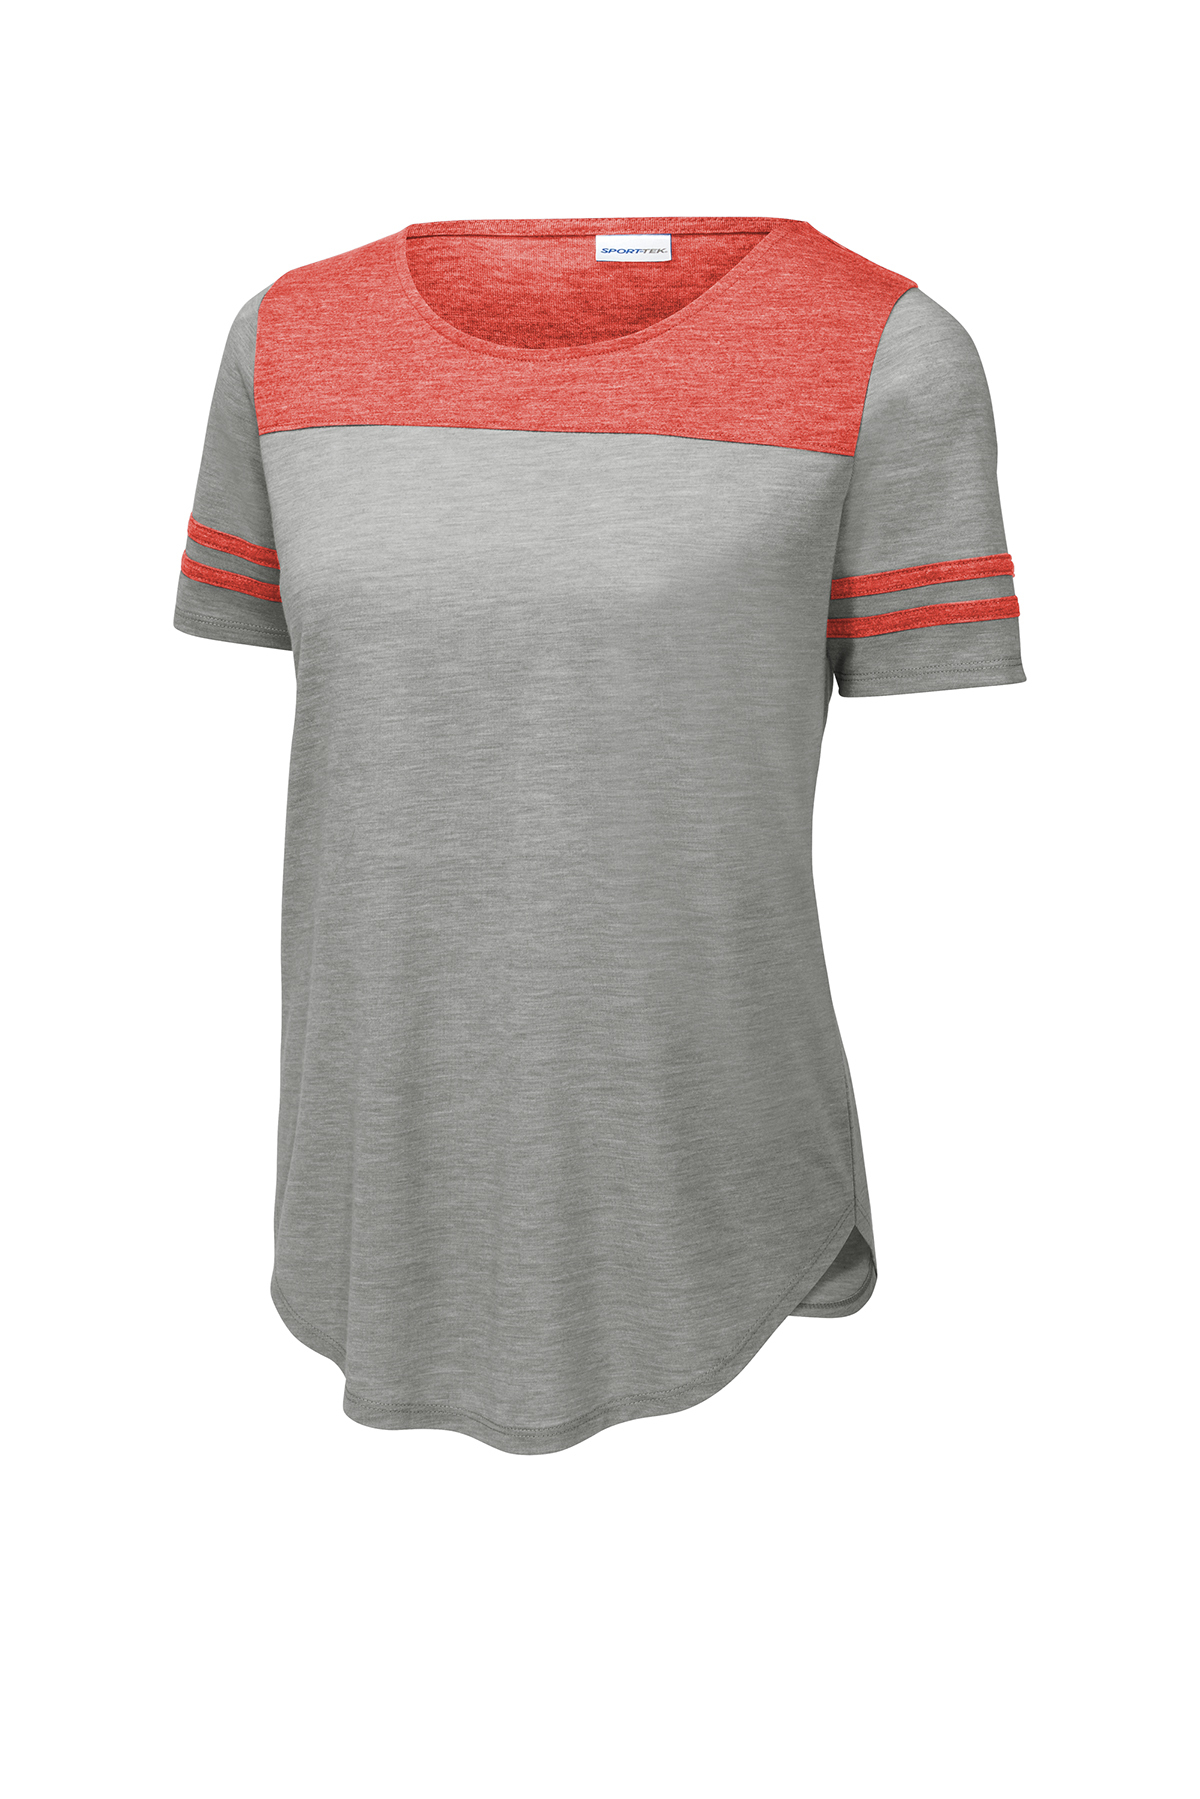 click to view True Red Heather/ Light Grey Heather